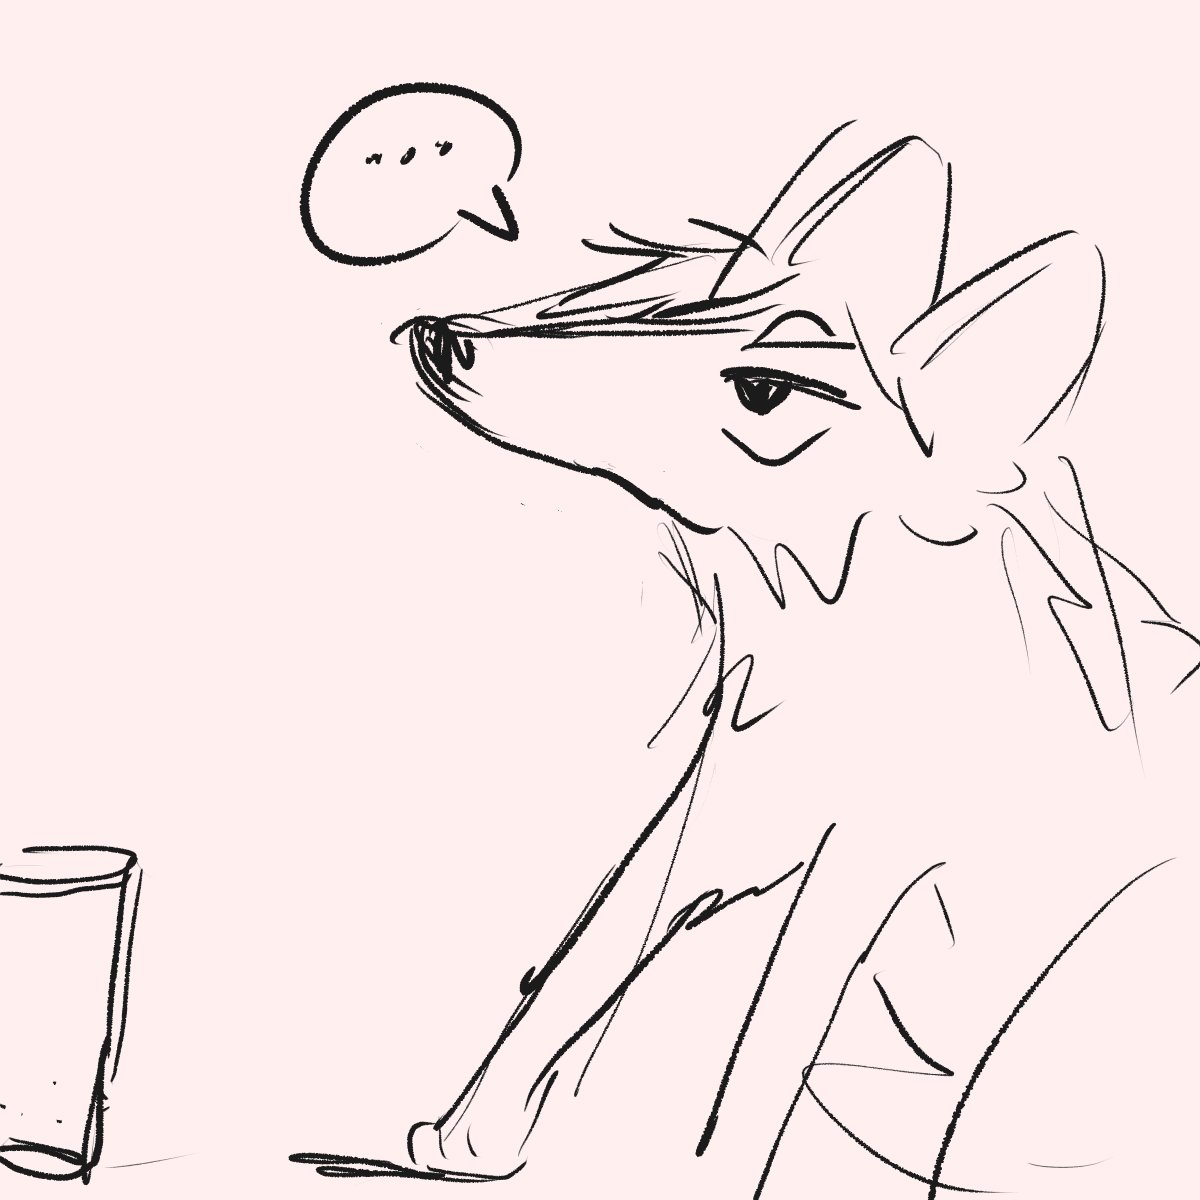 tsumufox gets his head stuck in a plastic coffee cup (to get attention)